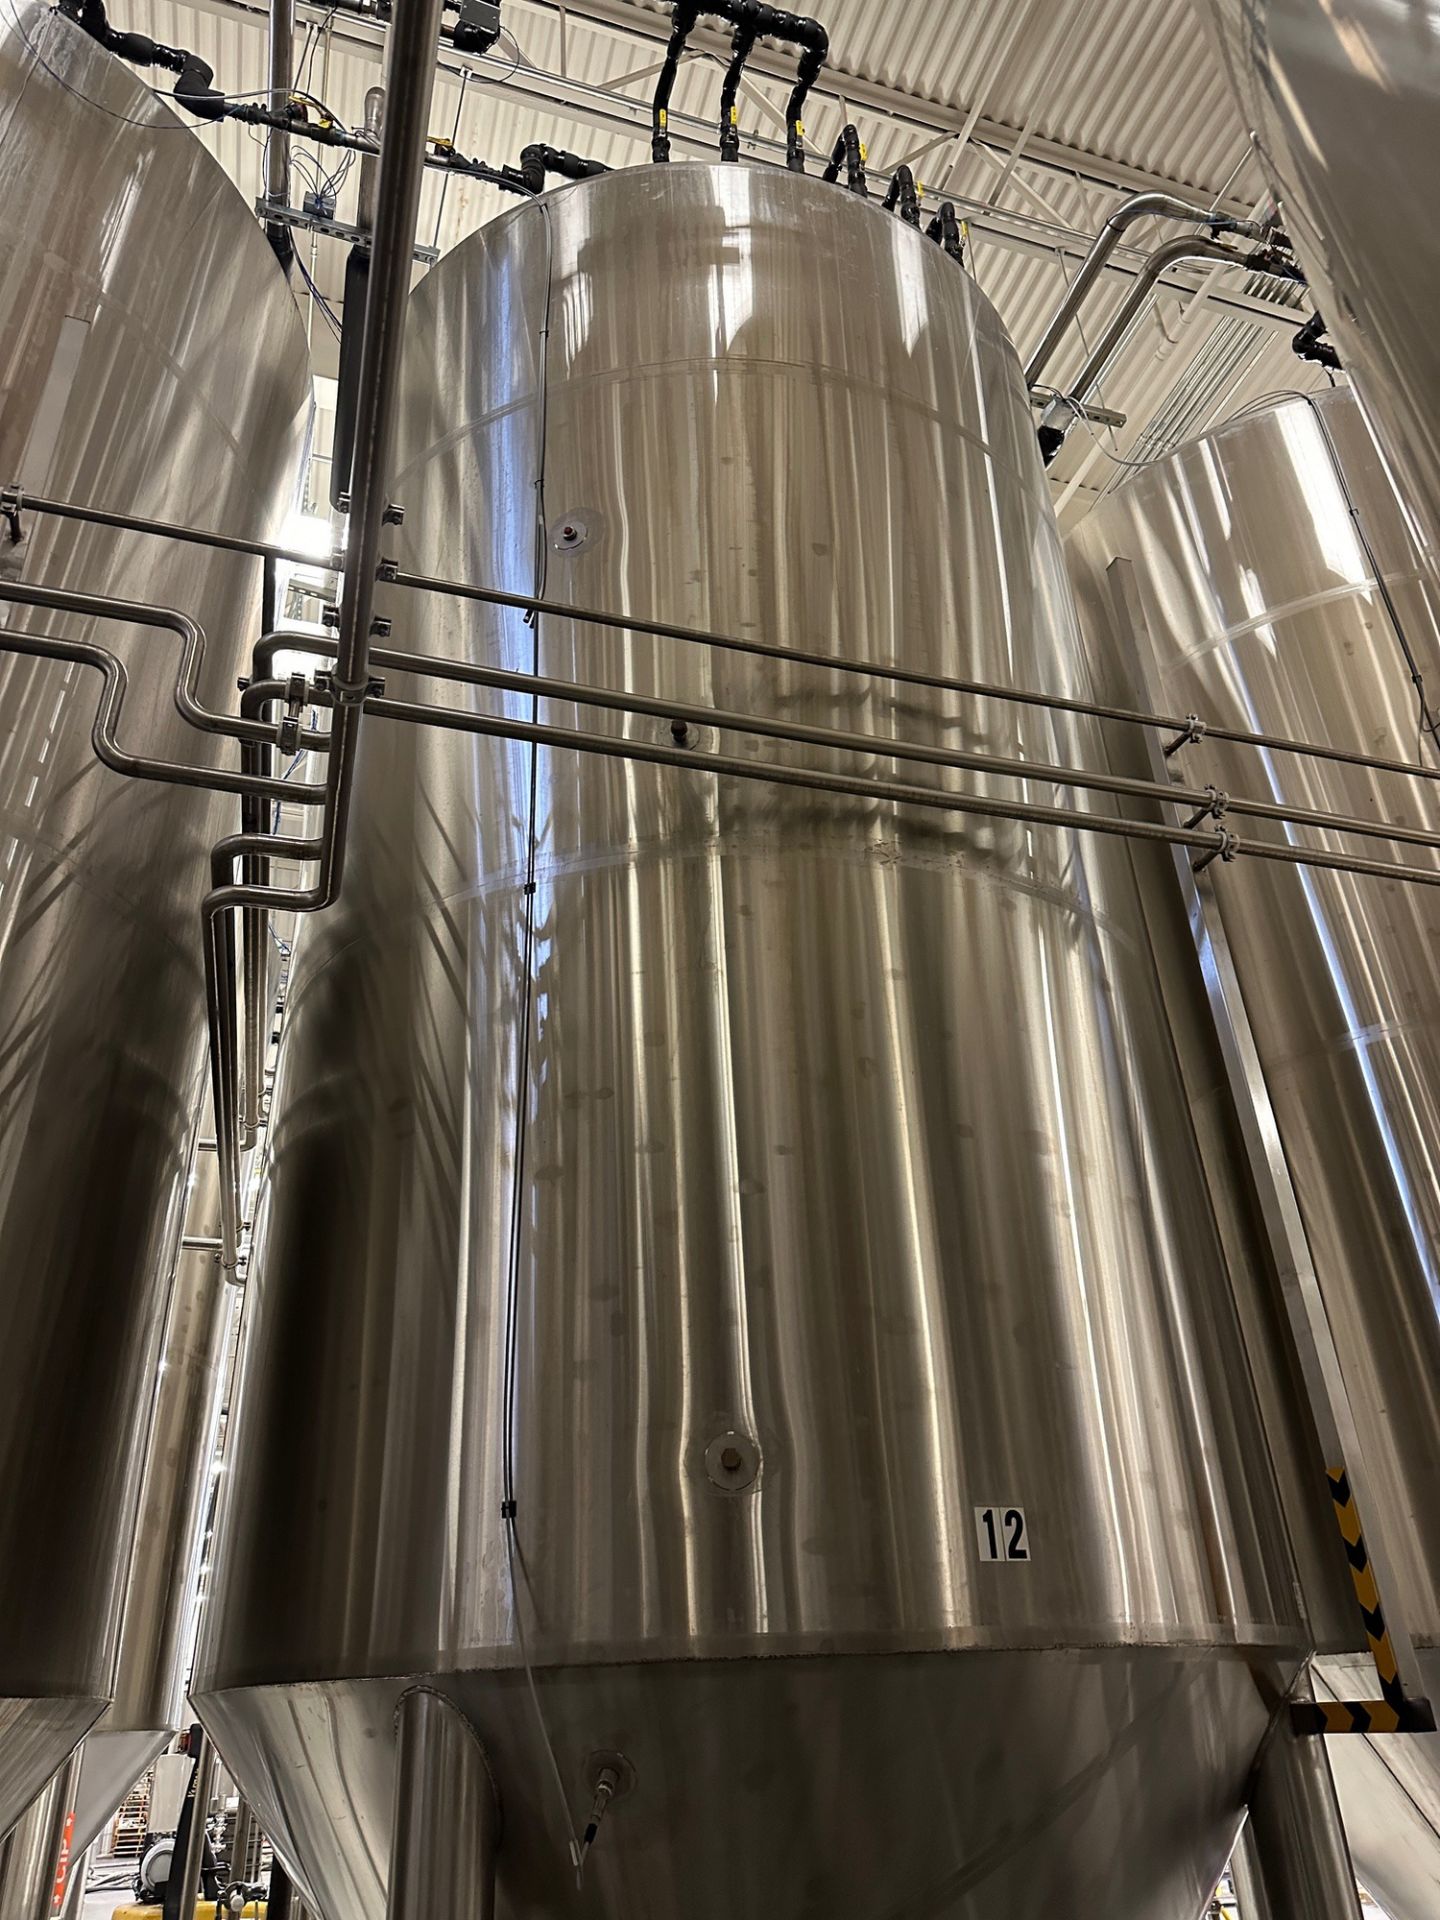 (1 of 8) 2020 Marks 132 BBL FV / 175 BBL or 5,400 Gal Max Capacity Jacketed Stainless Steel Ferm - Image 3 of 4